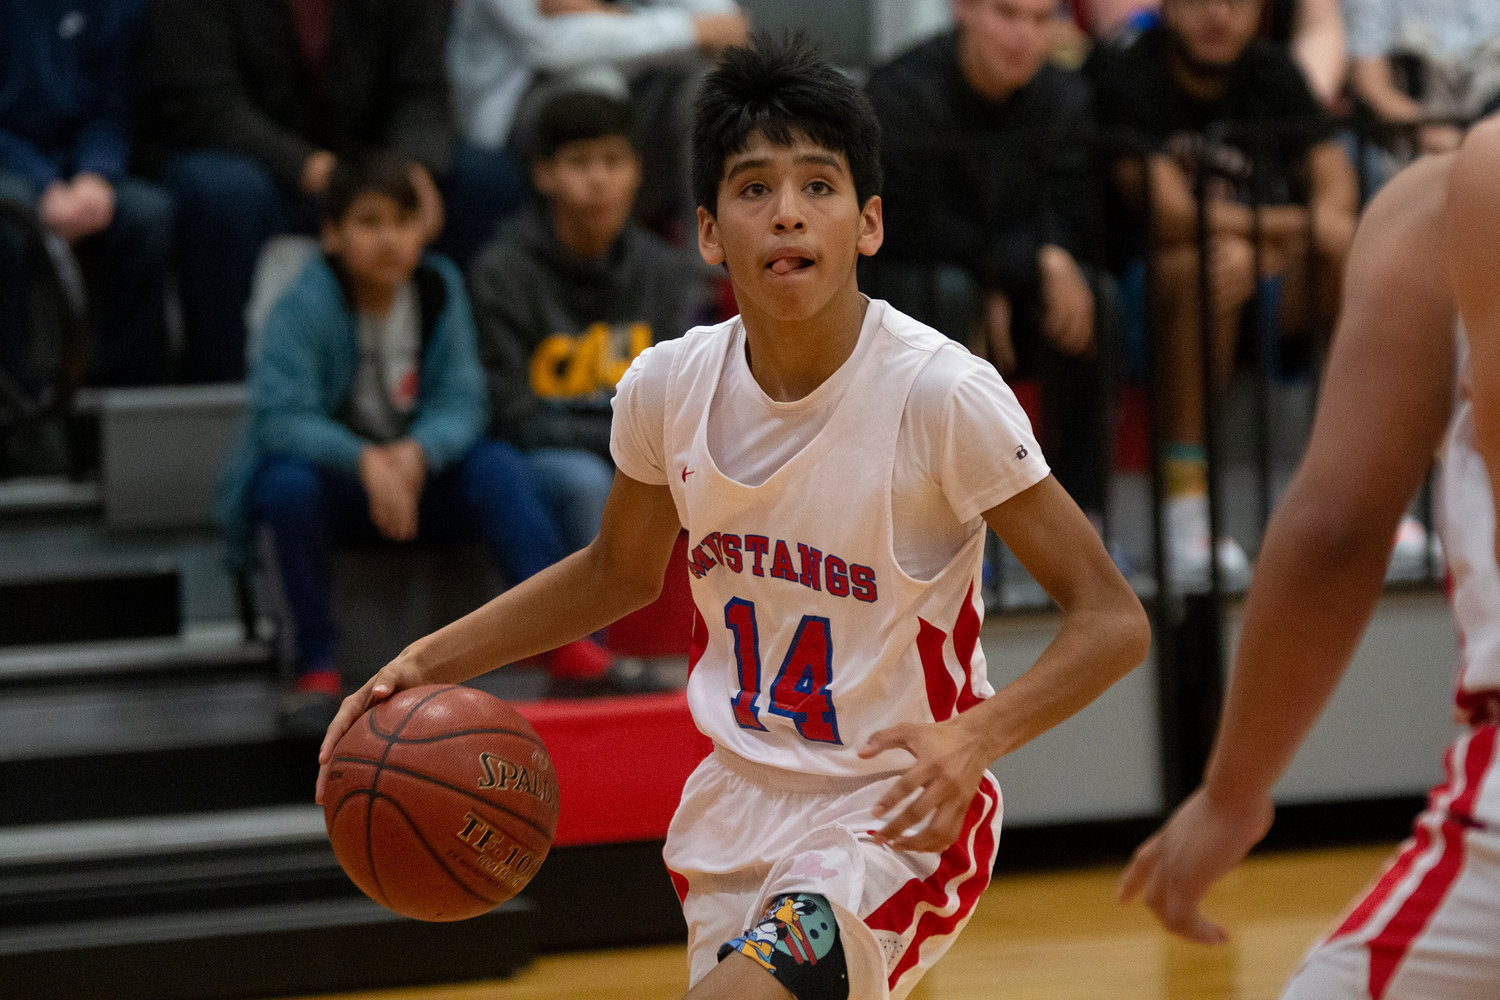 Brayden Martinez (14) looks to shoot in Nixon-Smiley’s 53-33 loss against Poth on Tuesday.